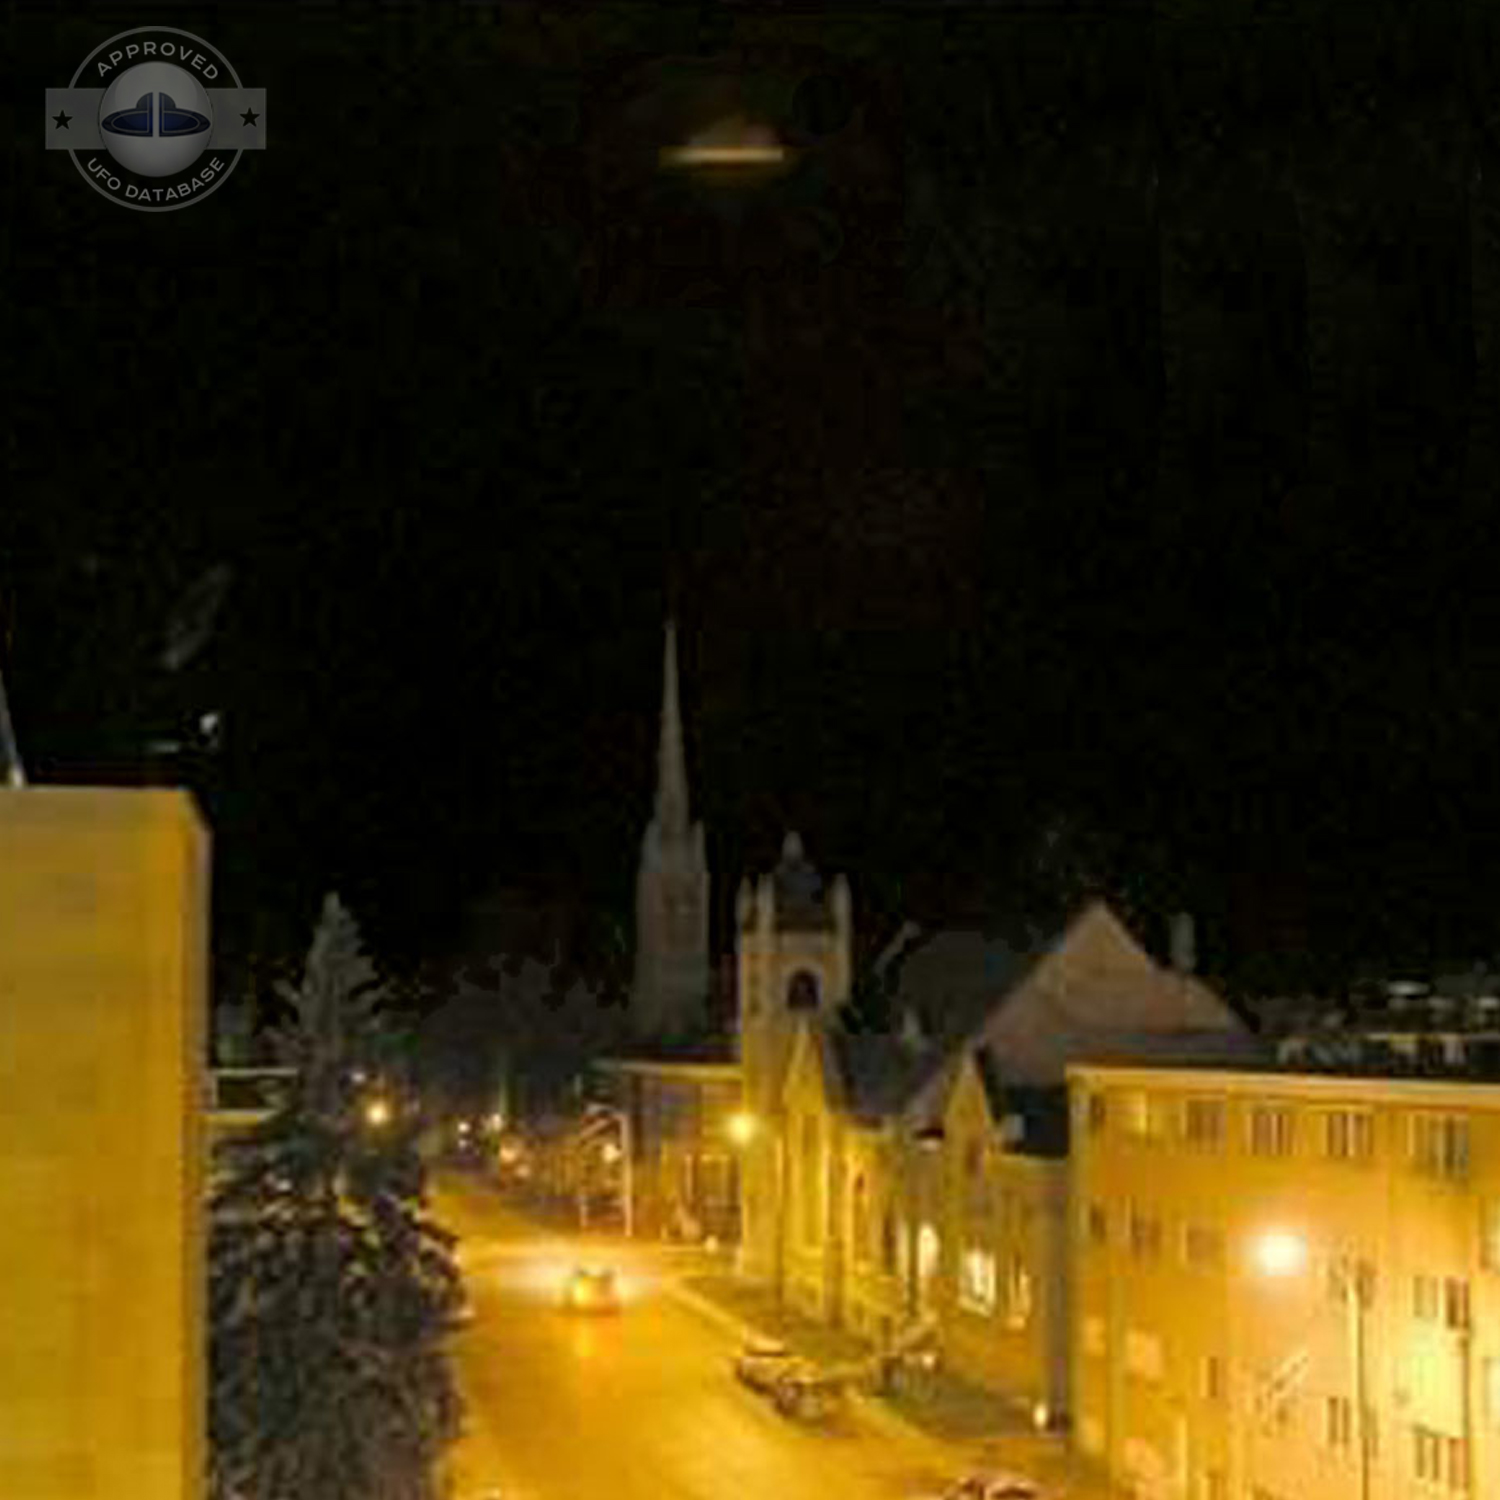 A Ufo is flying at night over the city of Kingston - December 2004 UFO Picture #25-2